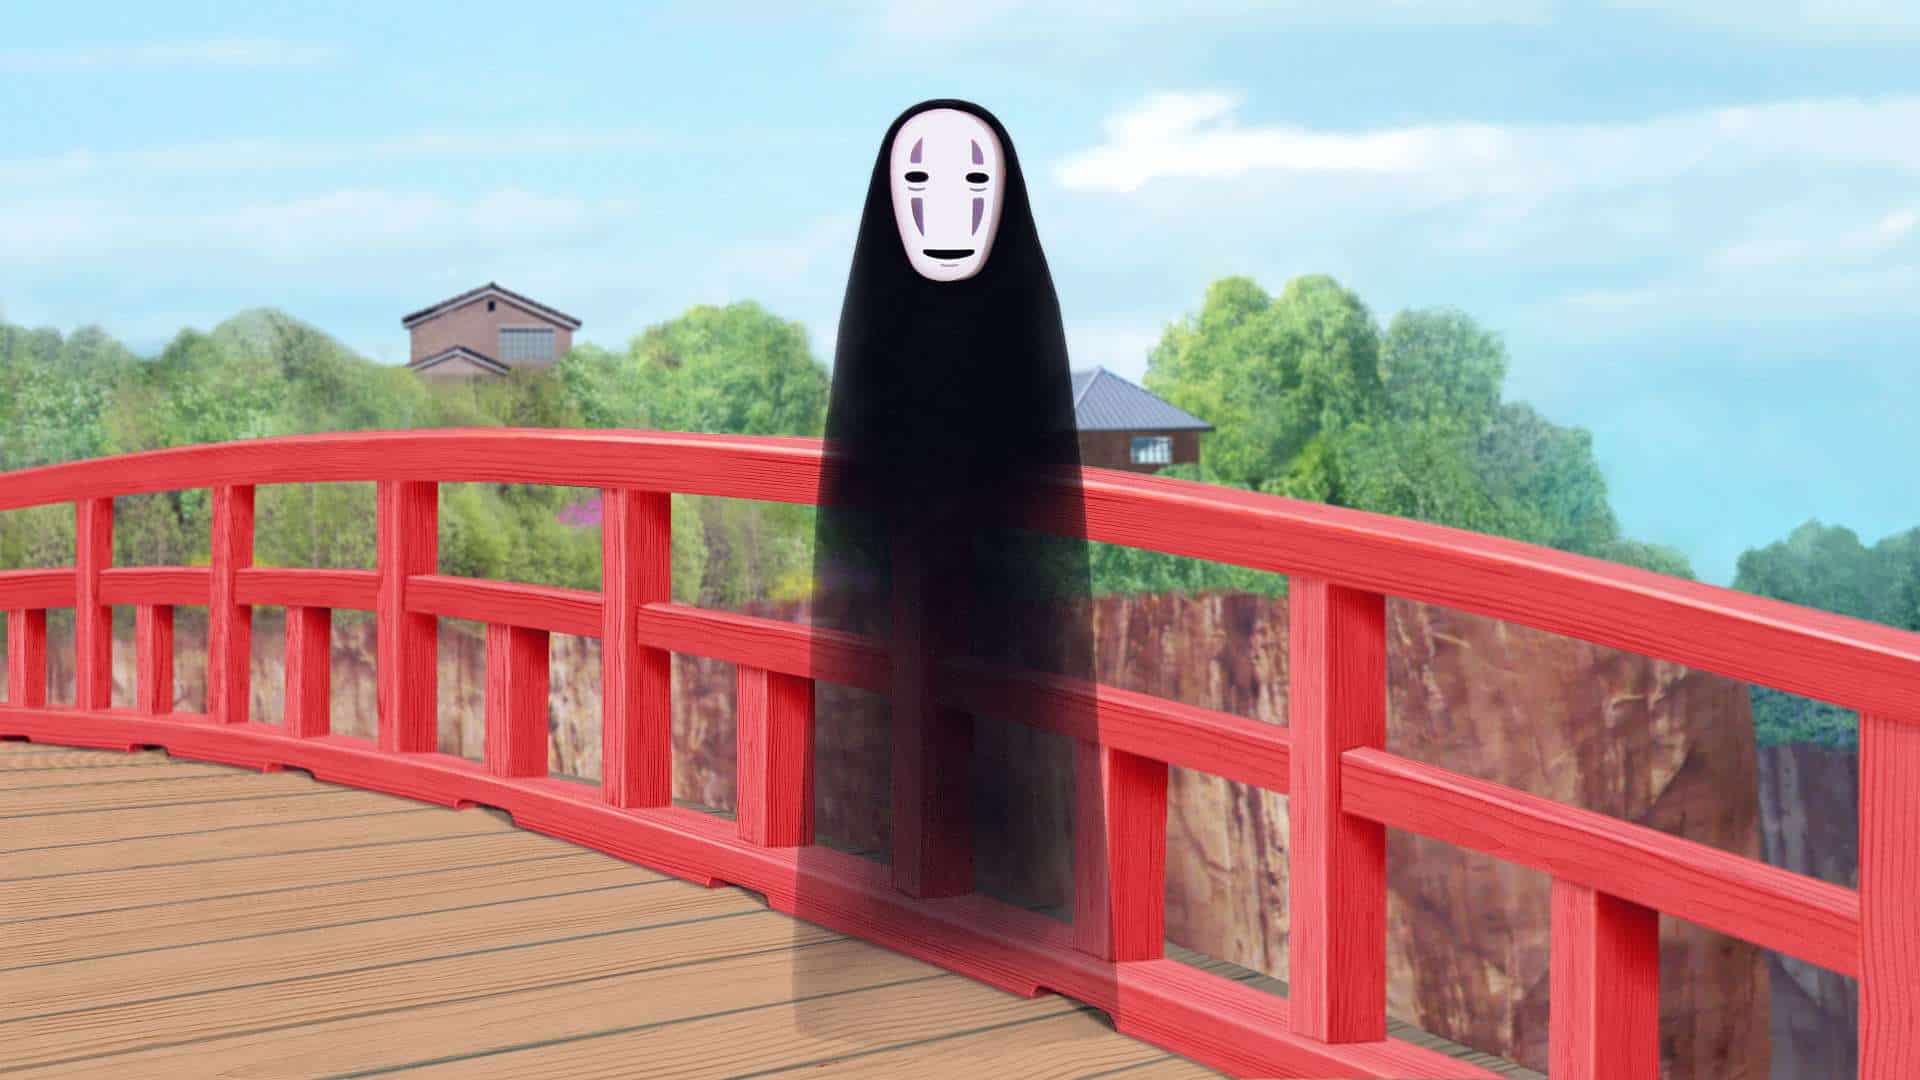 No-Face (Spirited Away): 10 Facts Fans Probably Don't Know